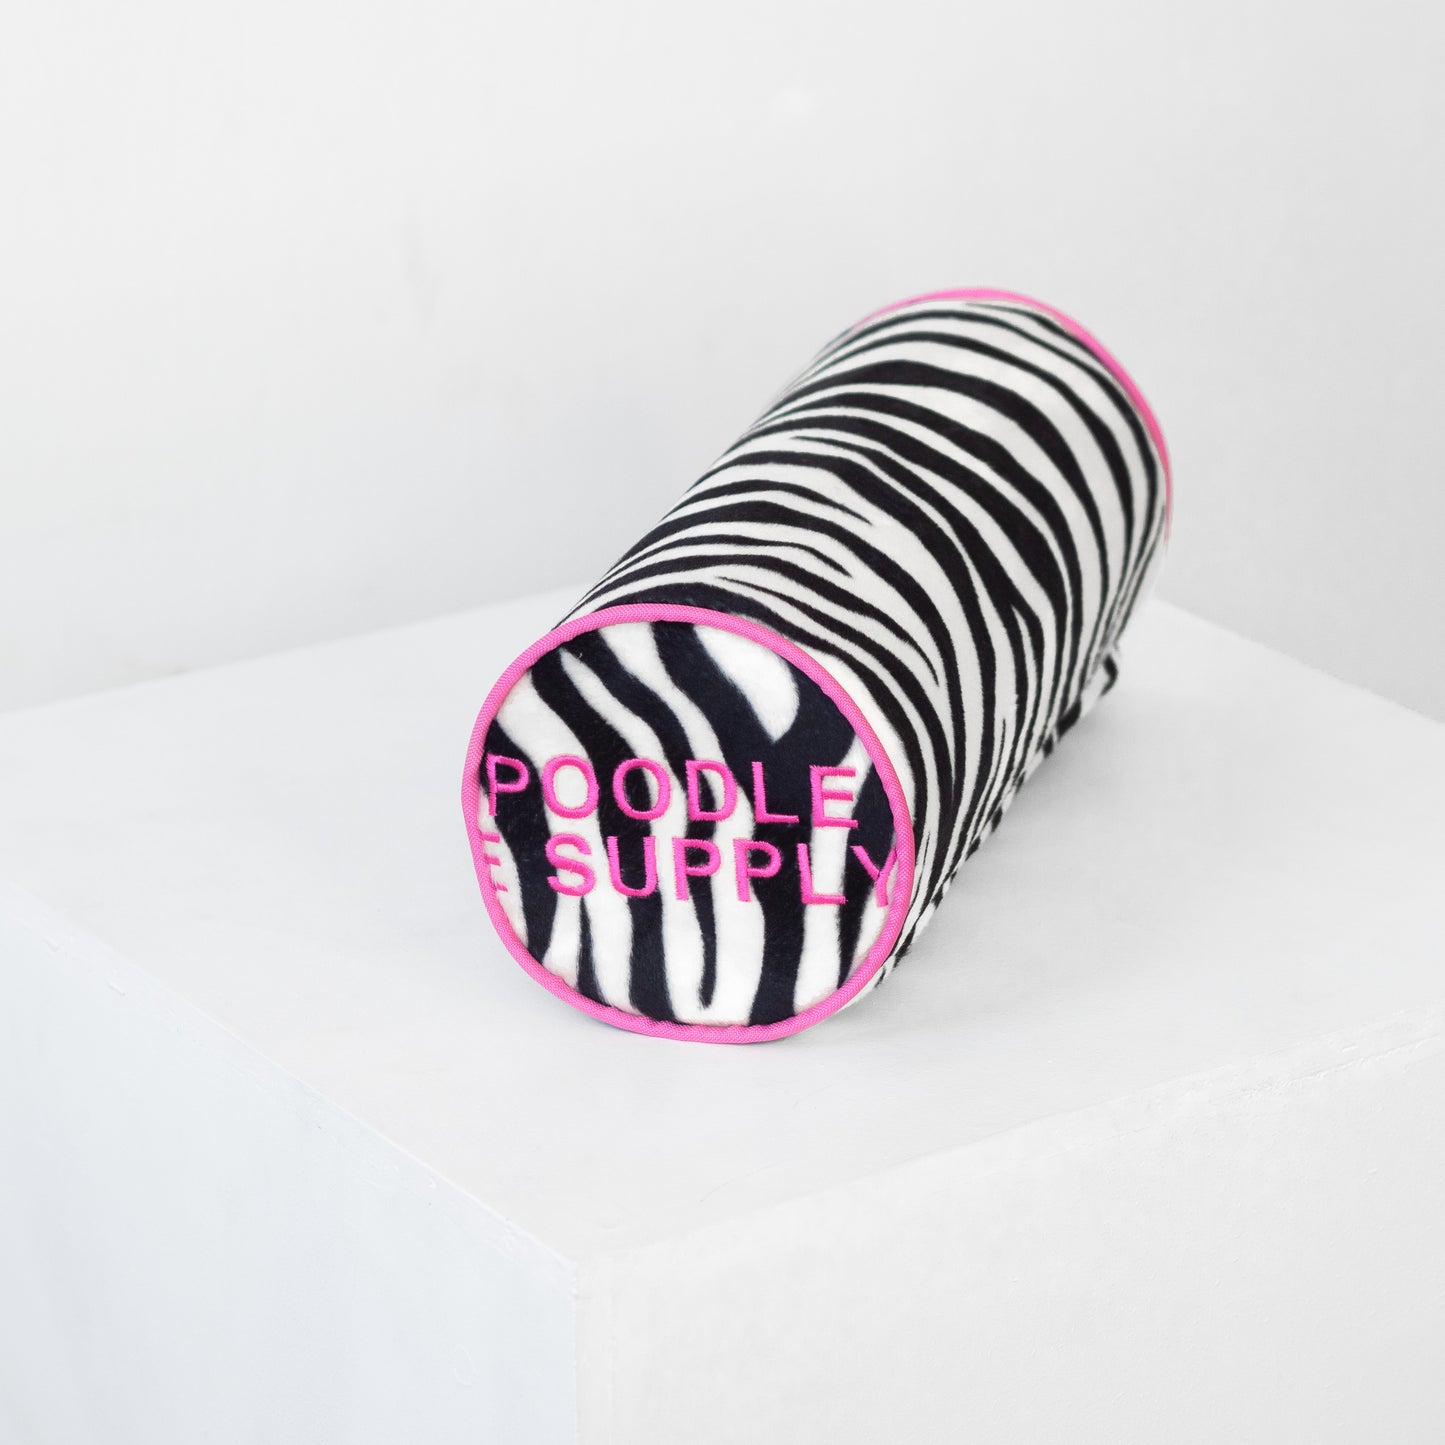 Poodle Supply Top Knot Pillow - Lord Zebra - Medium